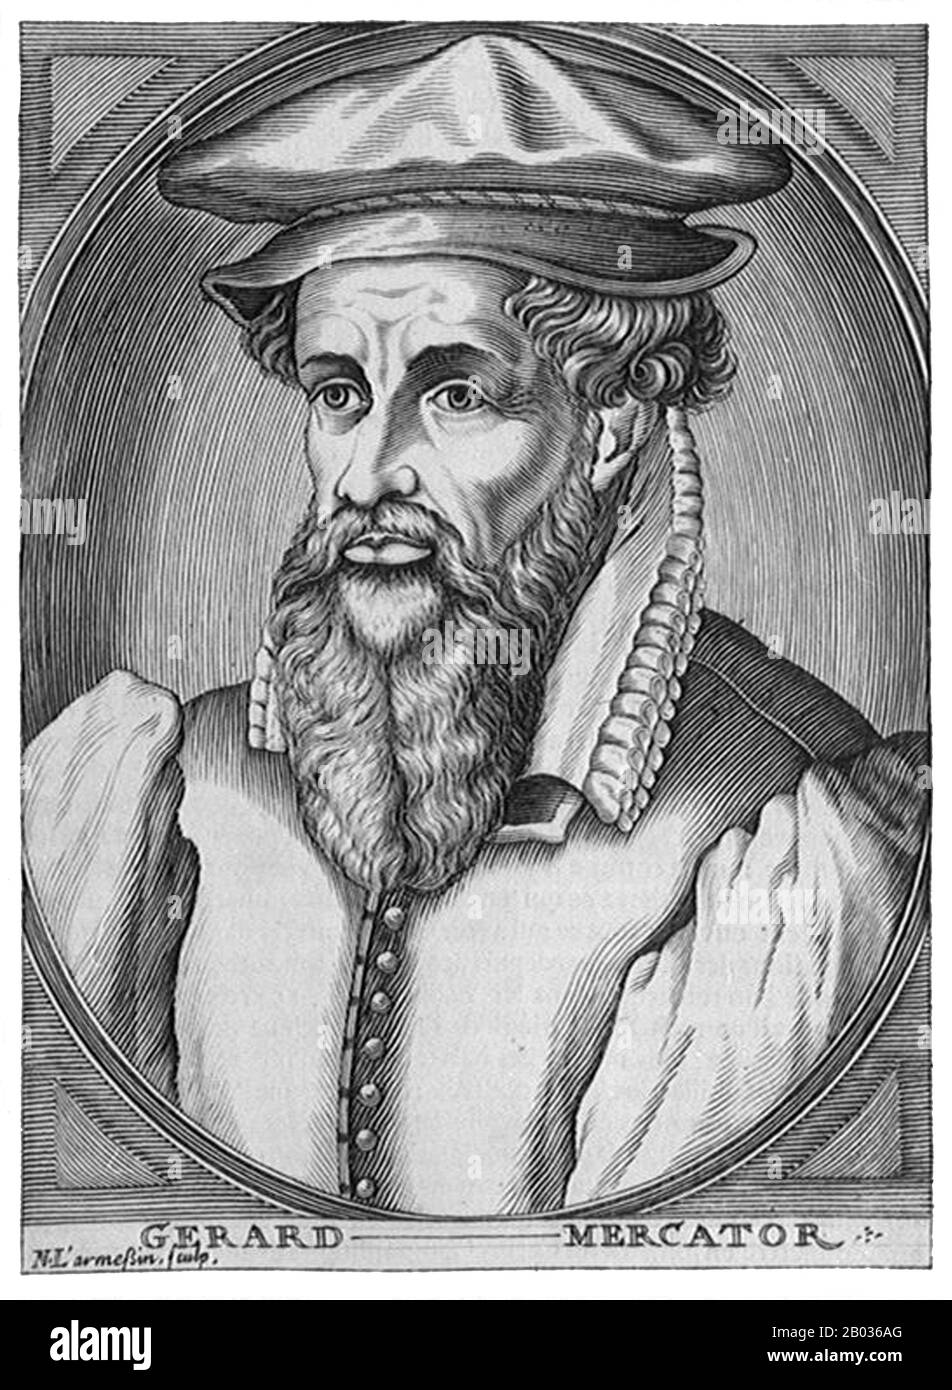 Gerardus Mercator, a Flemish German (5 March 1512 – 2 December 1594) was a cartographer renowned for creating a world map based on a new projection which represented sailing courses of constant bearing as straight lines—an innovation that is still employed in nautical charts used for navigation.  In his own day he was the world's most famous geographer but, in addition, he had interests in theology, philosophy, history, mathematics and magnetism as well as being an accomplished engraver, calligrapher and maker of globes and scientific instruments. Stock Photo